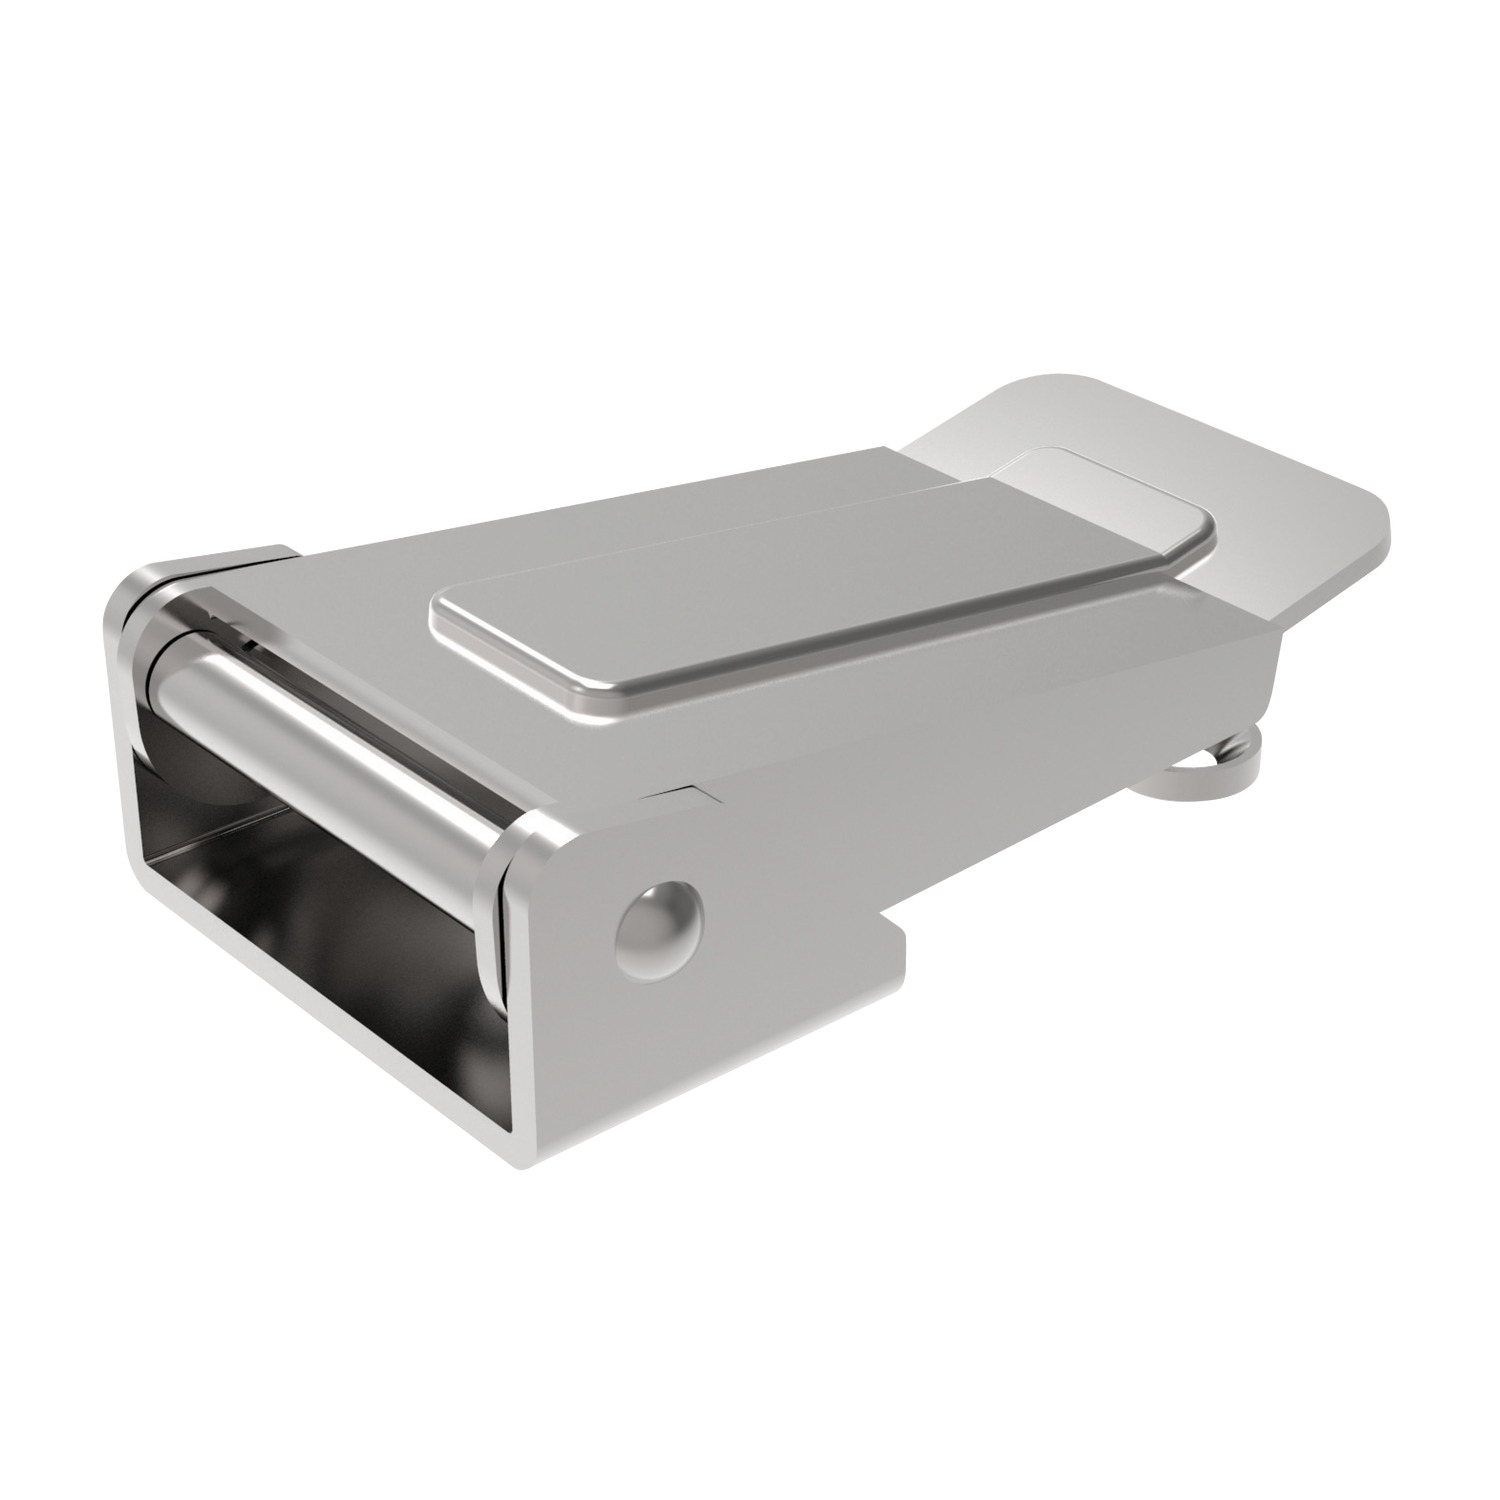 J0560.AC0030 Toggle Latches Stainless Steel - 88 - 26 - 48,5